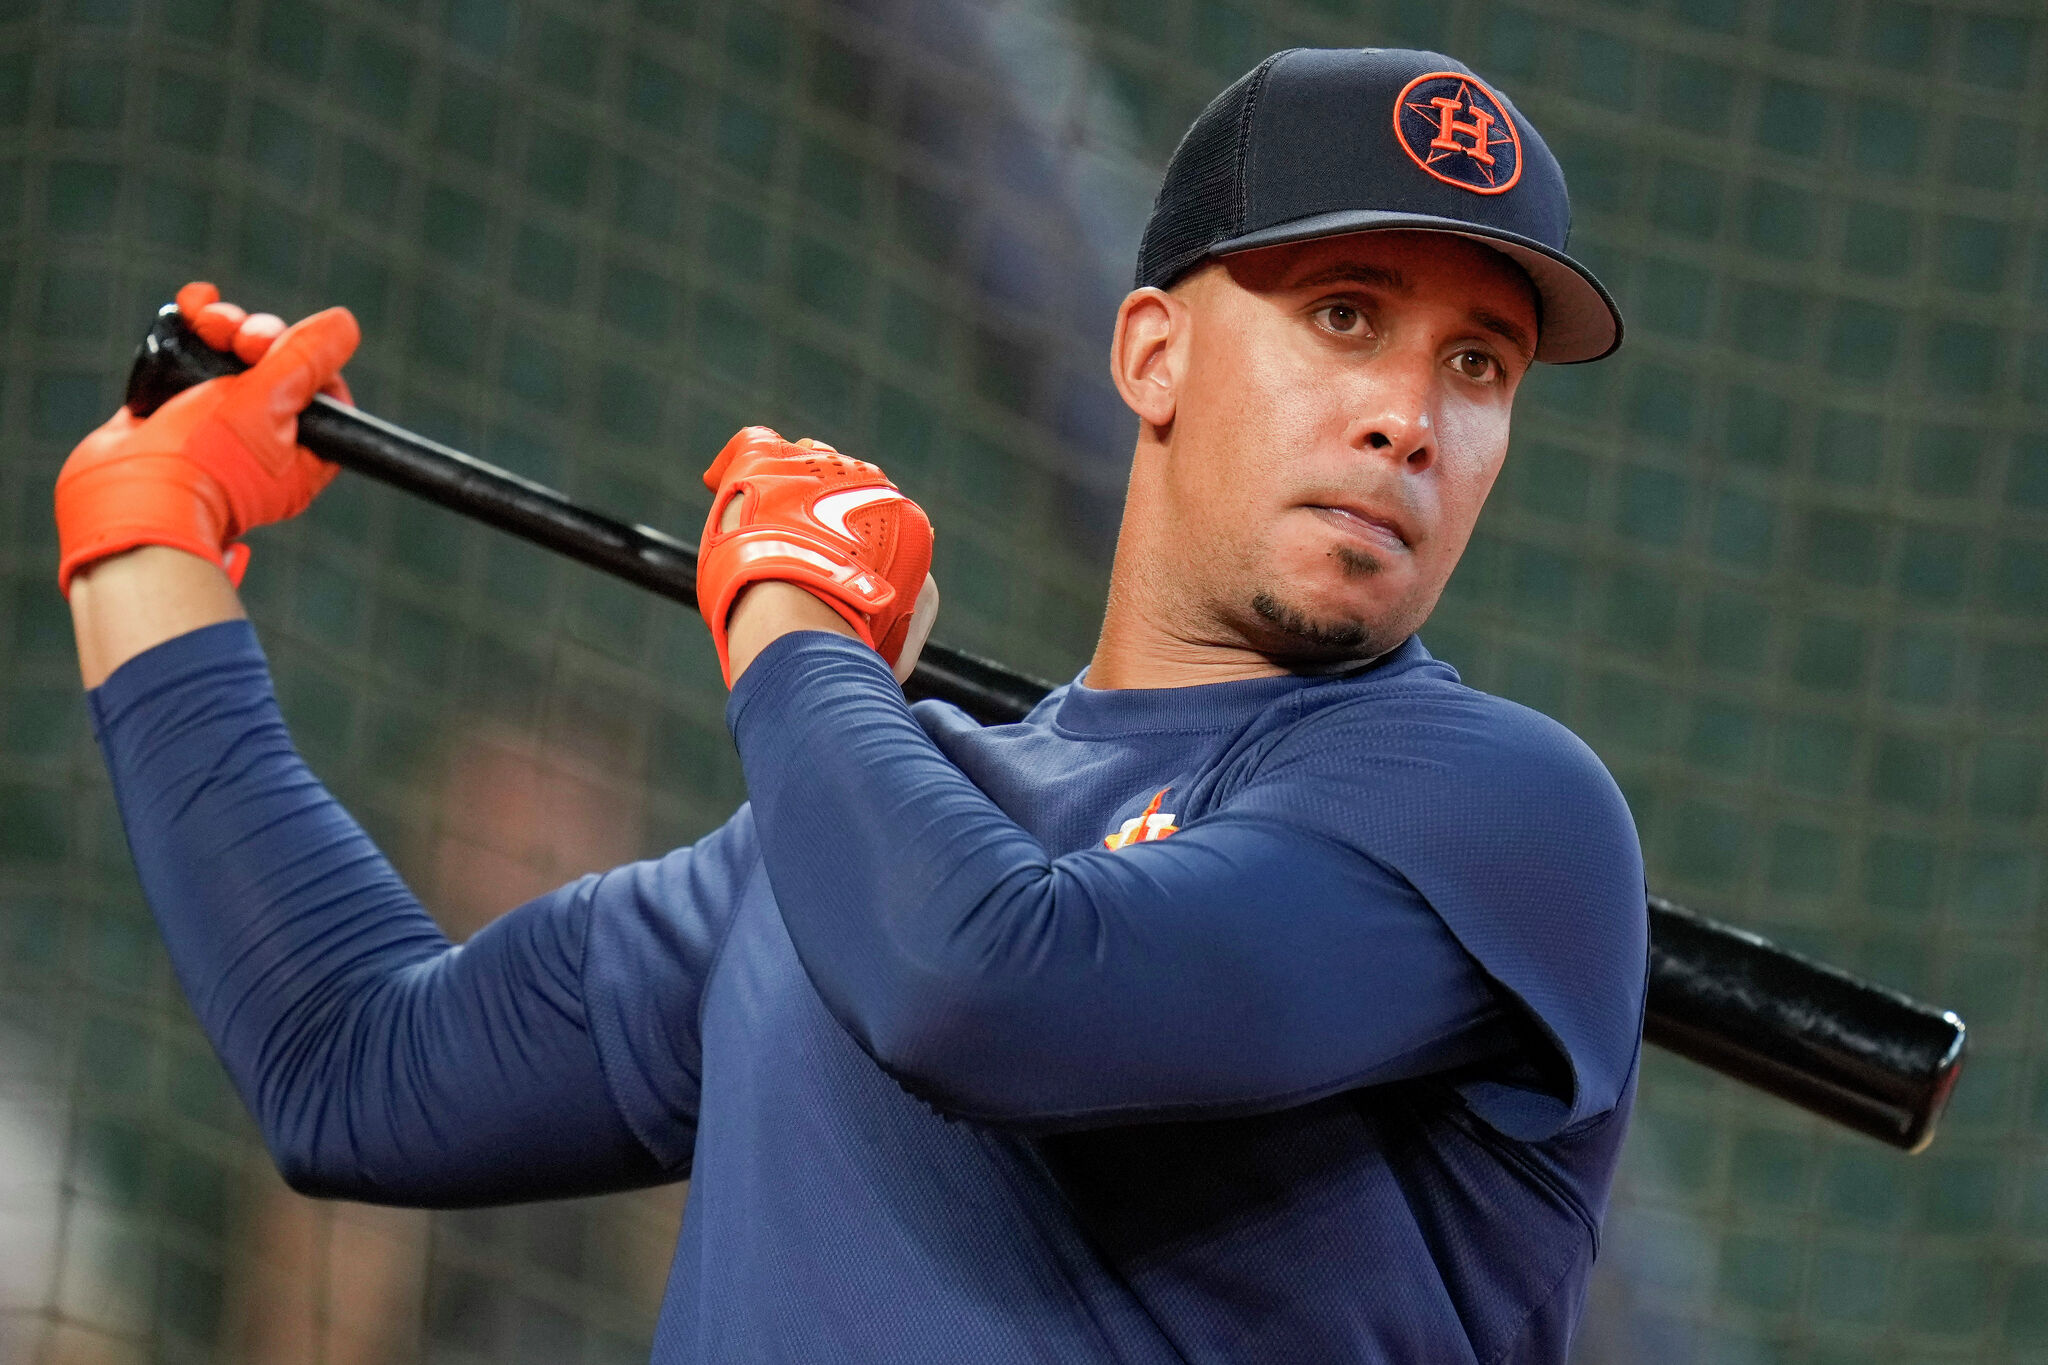 Houston Astros: Michael Brantley says he's on schedule for return